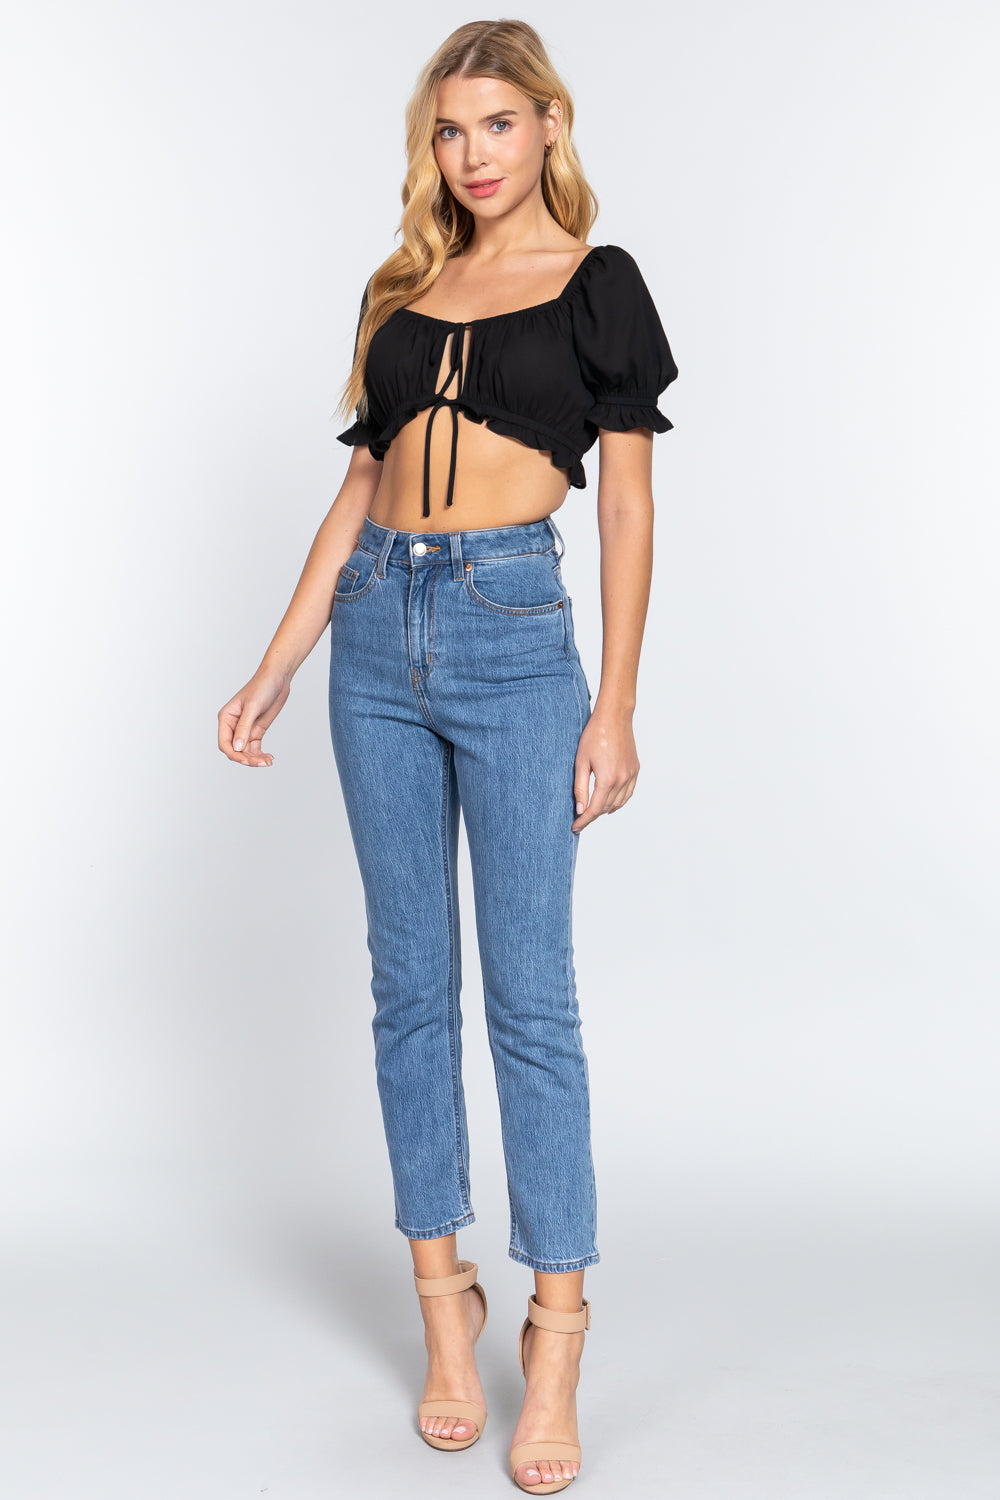 Short Puffed Sleeves Crop Top with Front Tie Closure, Black - Small